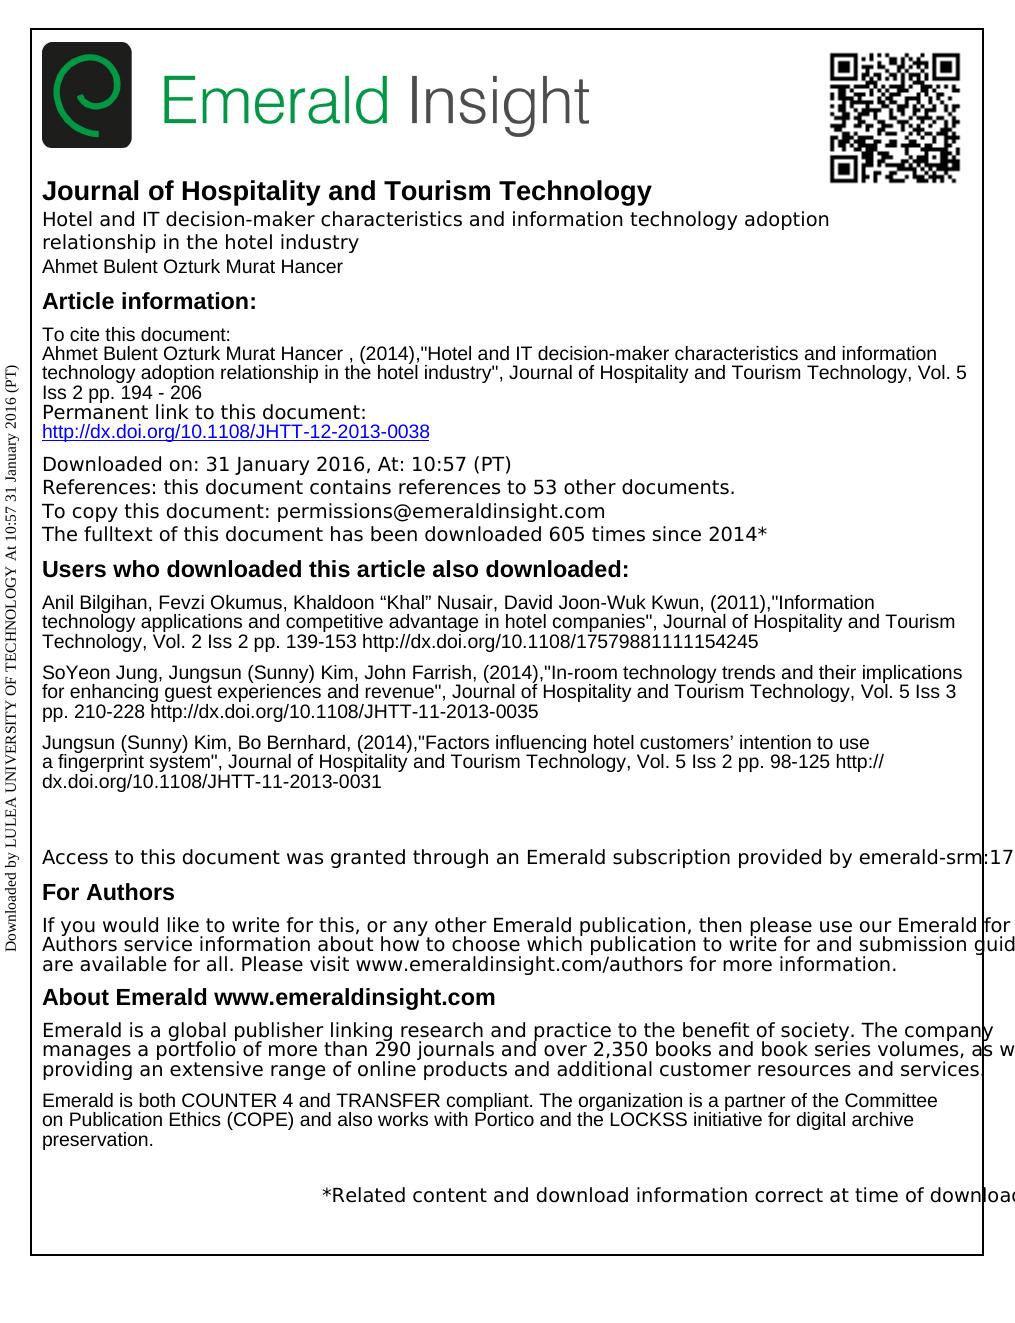 Hotel and IT decision-maker characteristics and information technology adoption relationship in the hotel industry_1